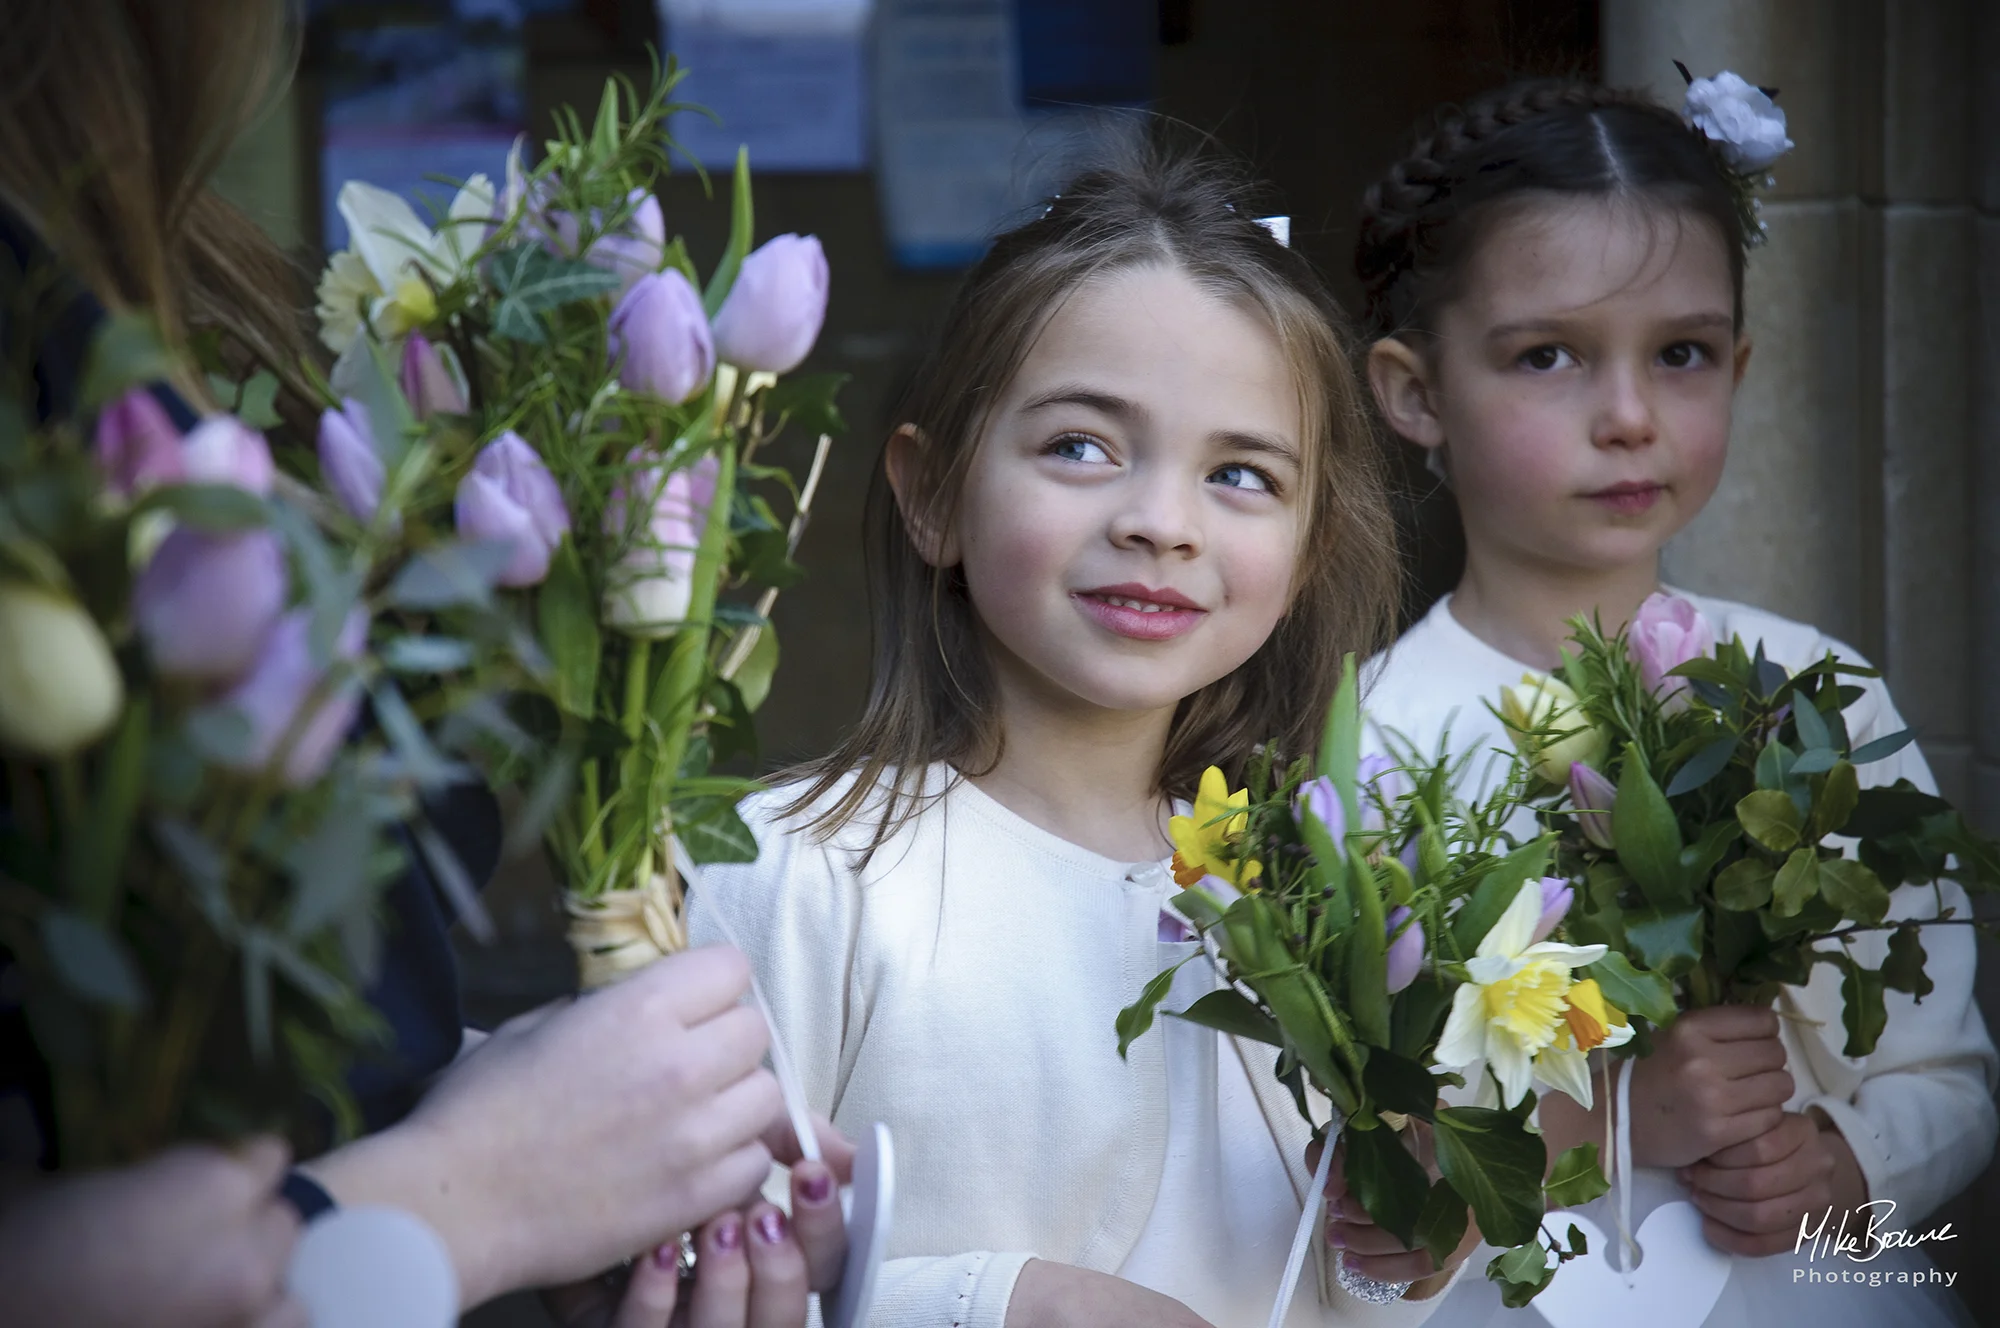 Young bridesmaids with quizzical expressions surrounded by flowers